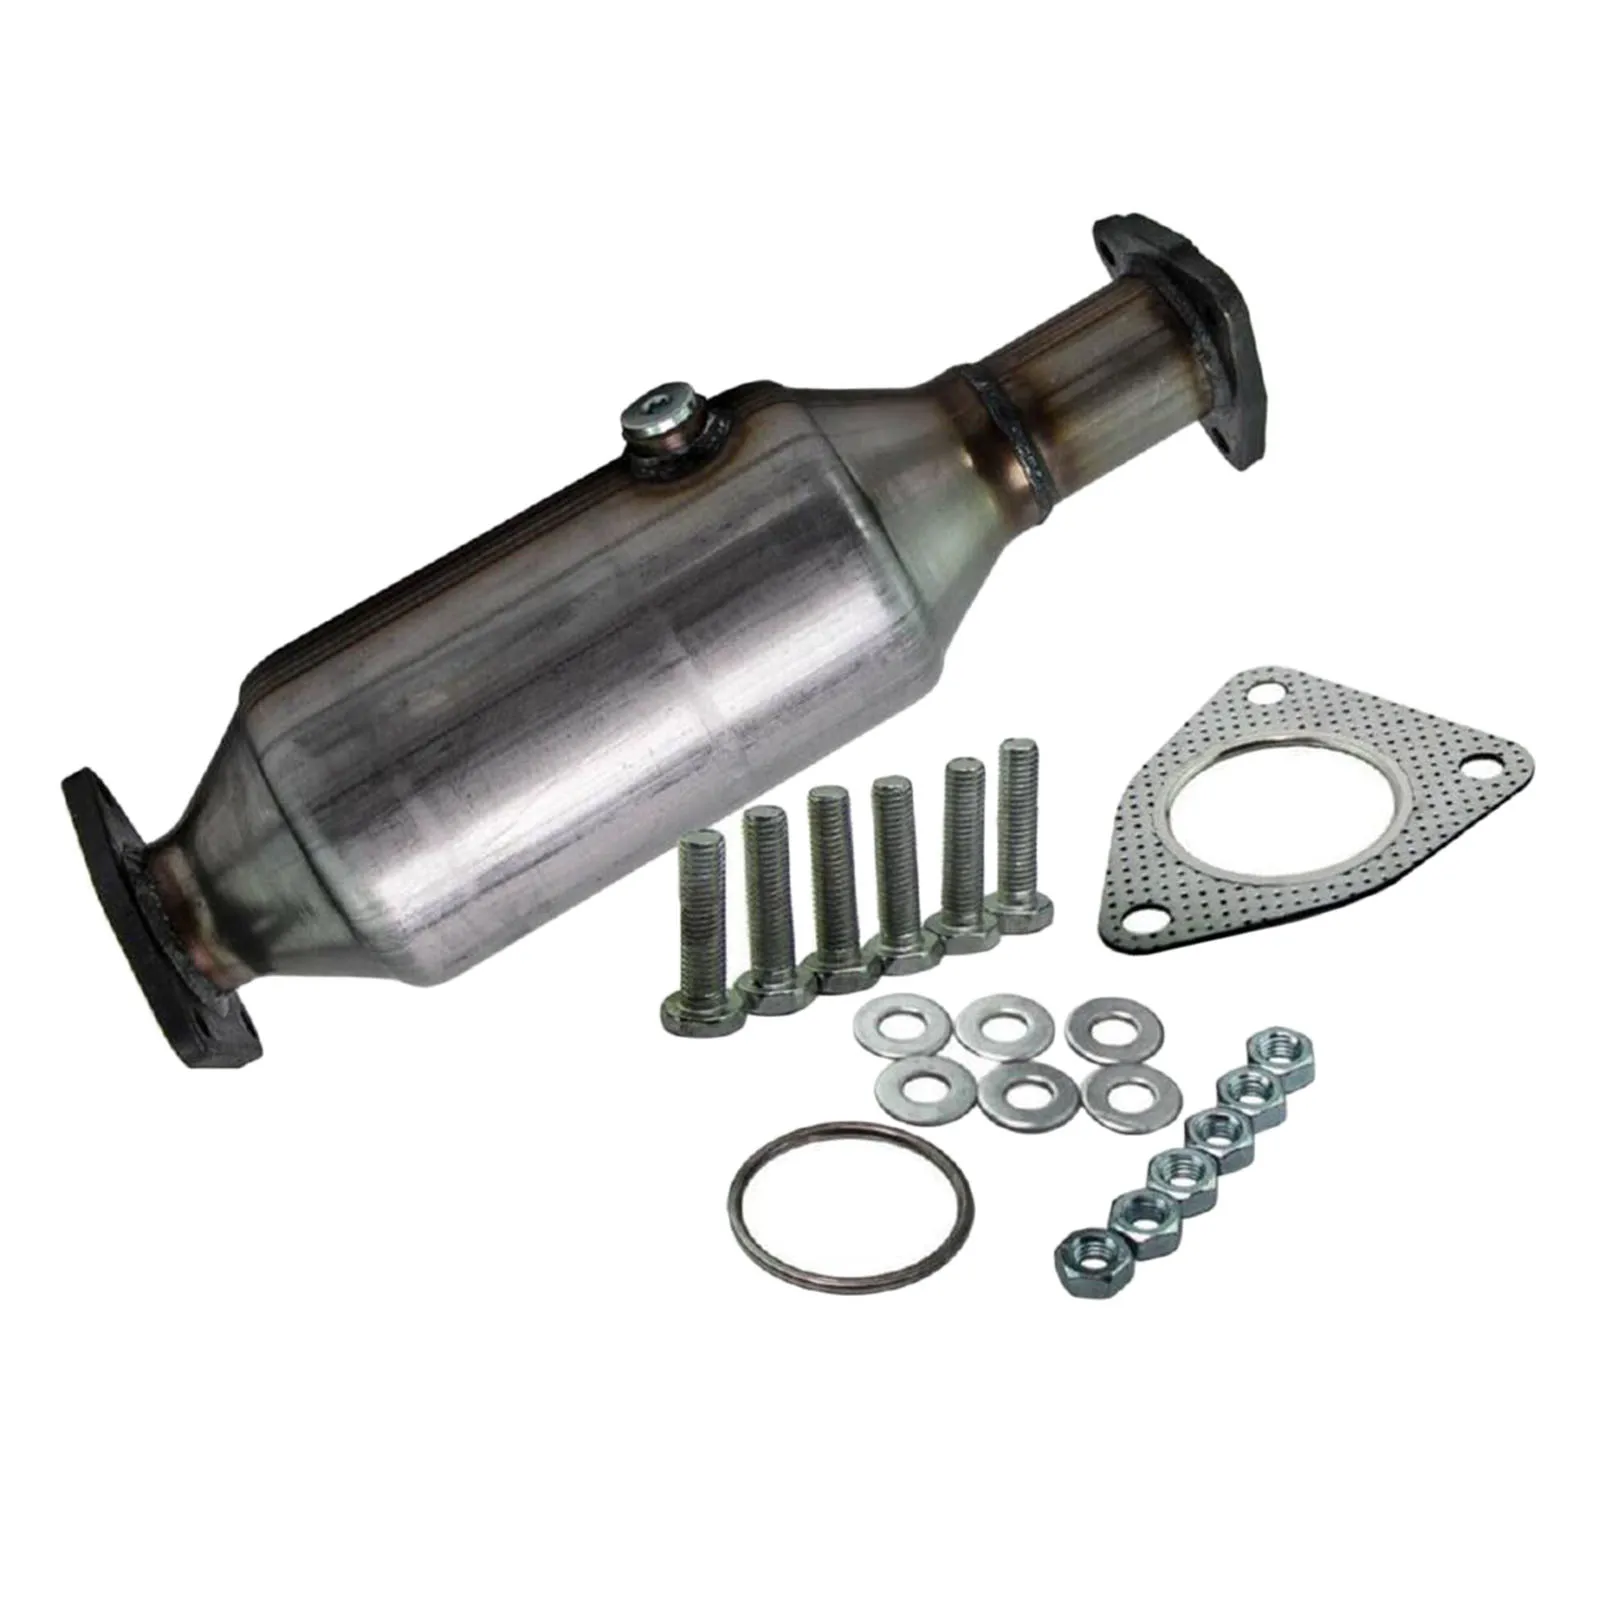 Catalytic Converter Fits for 1998-2002 Honda Accord 2.3L Includes Bolts and